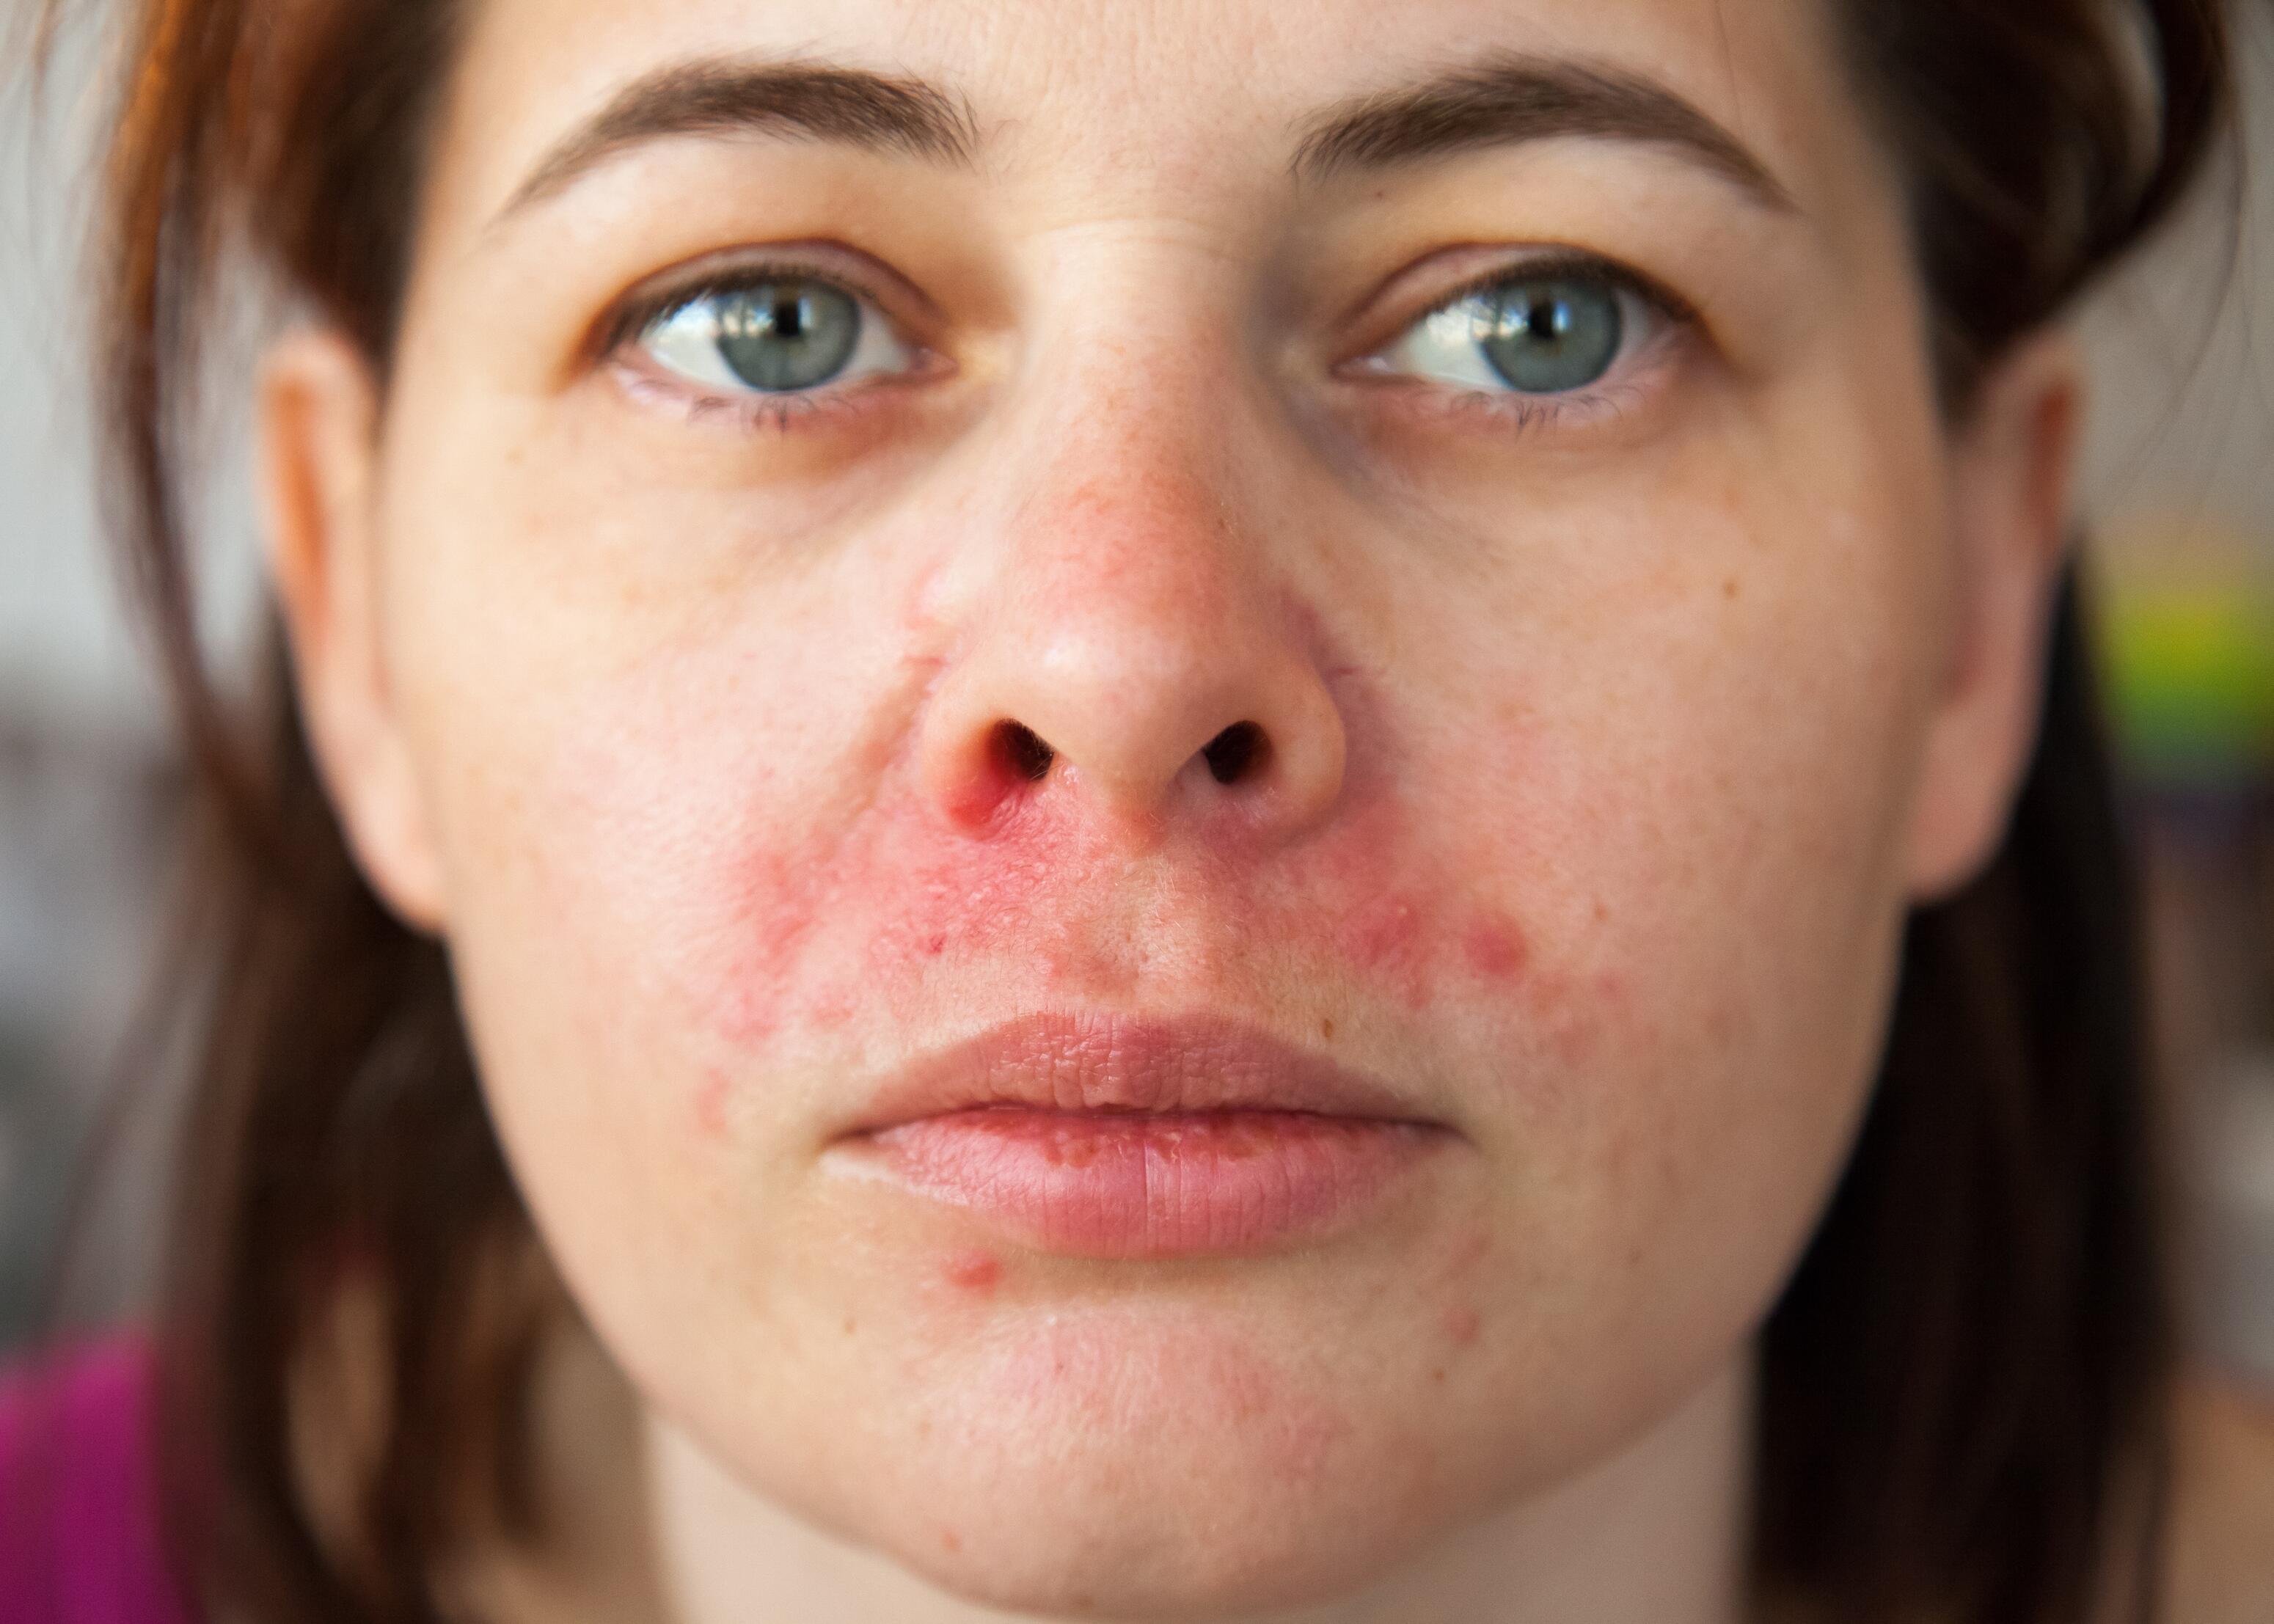 Woman with eczema on the face